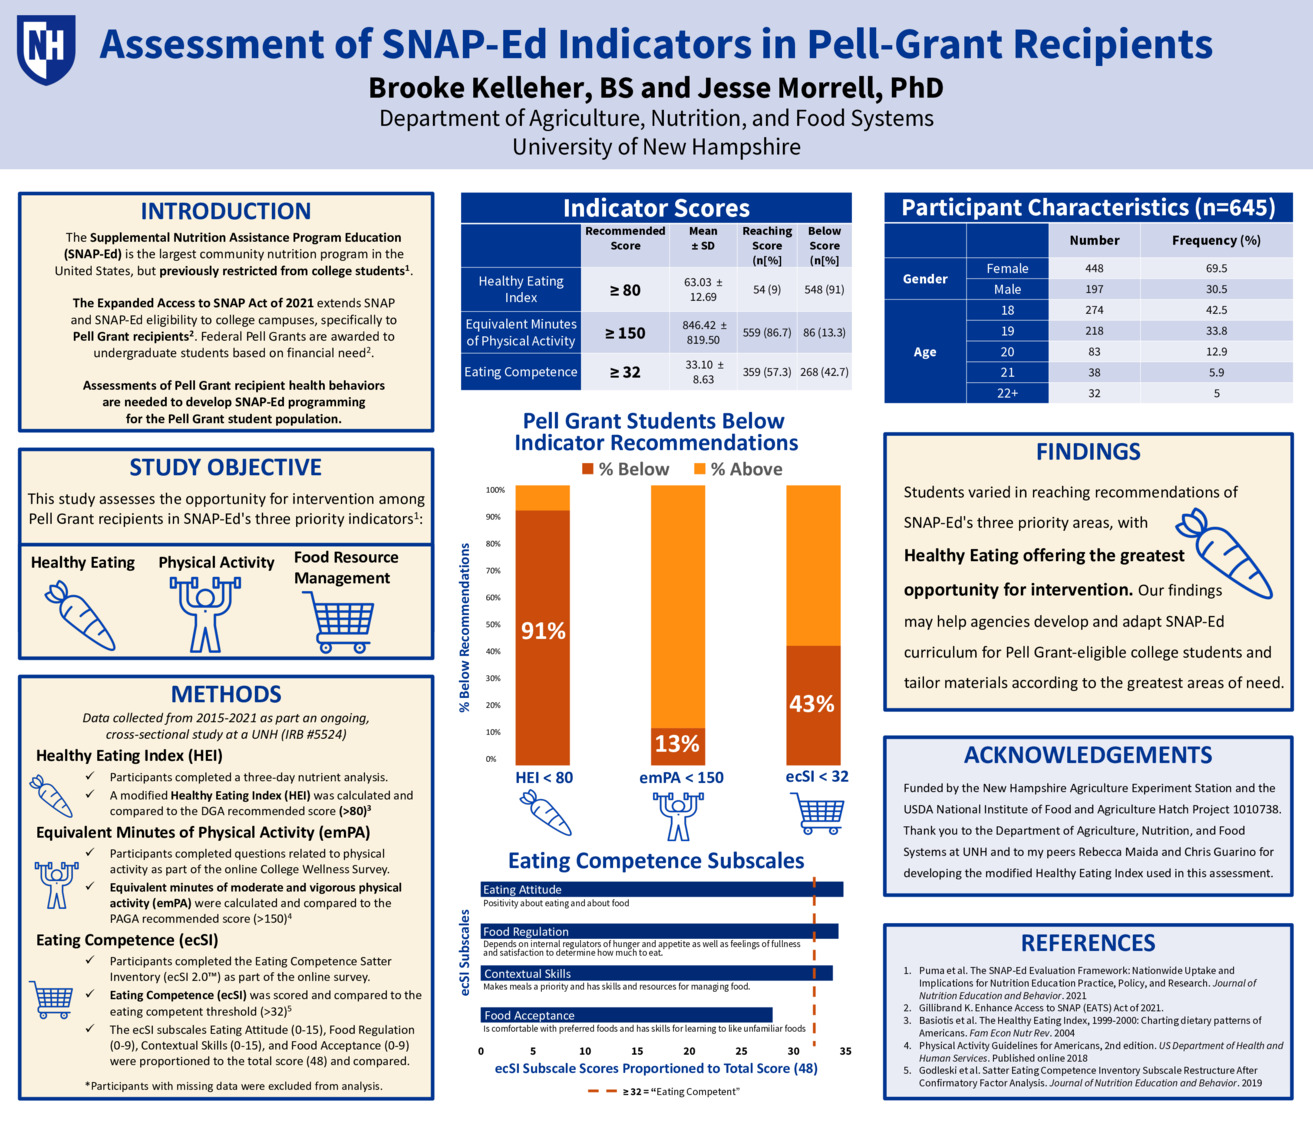 Assessment Of Snap-Ed Indicators In Pell-Grant Recipients by bac72